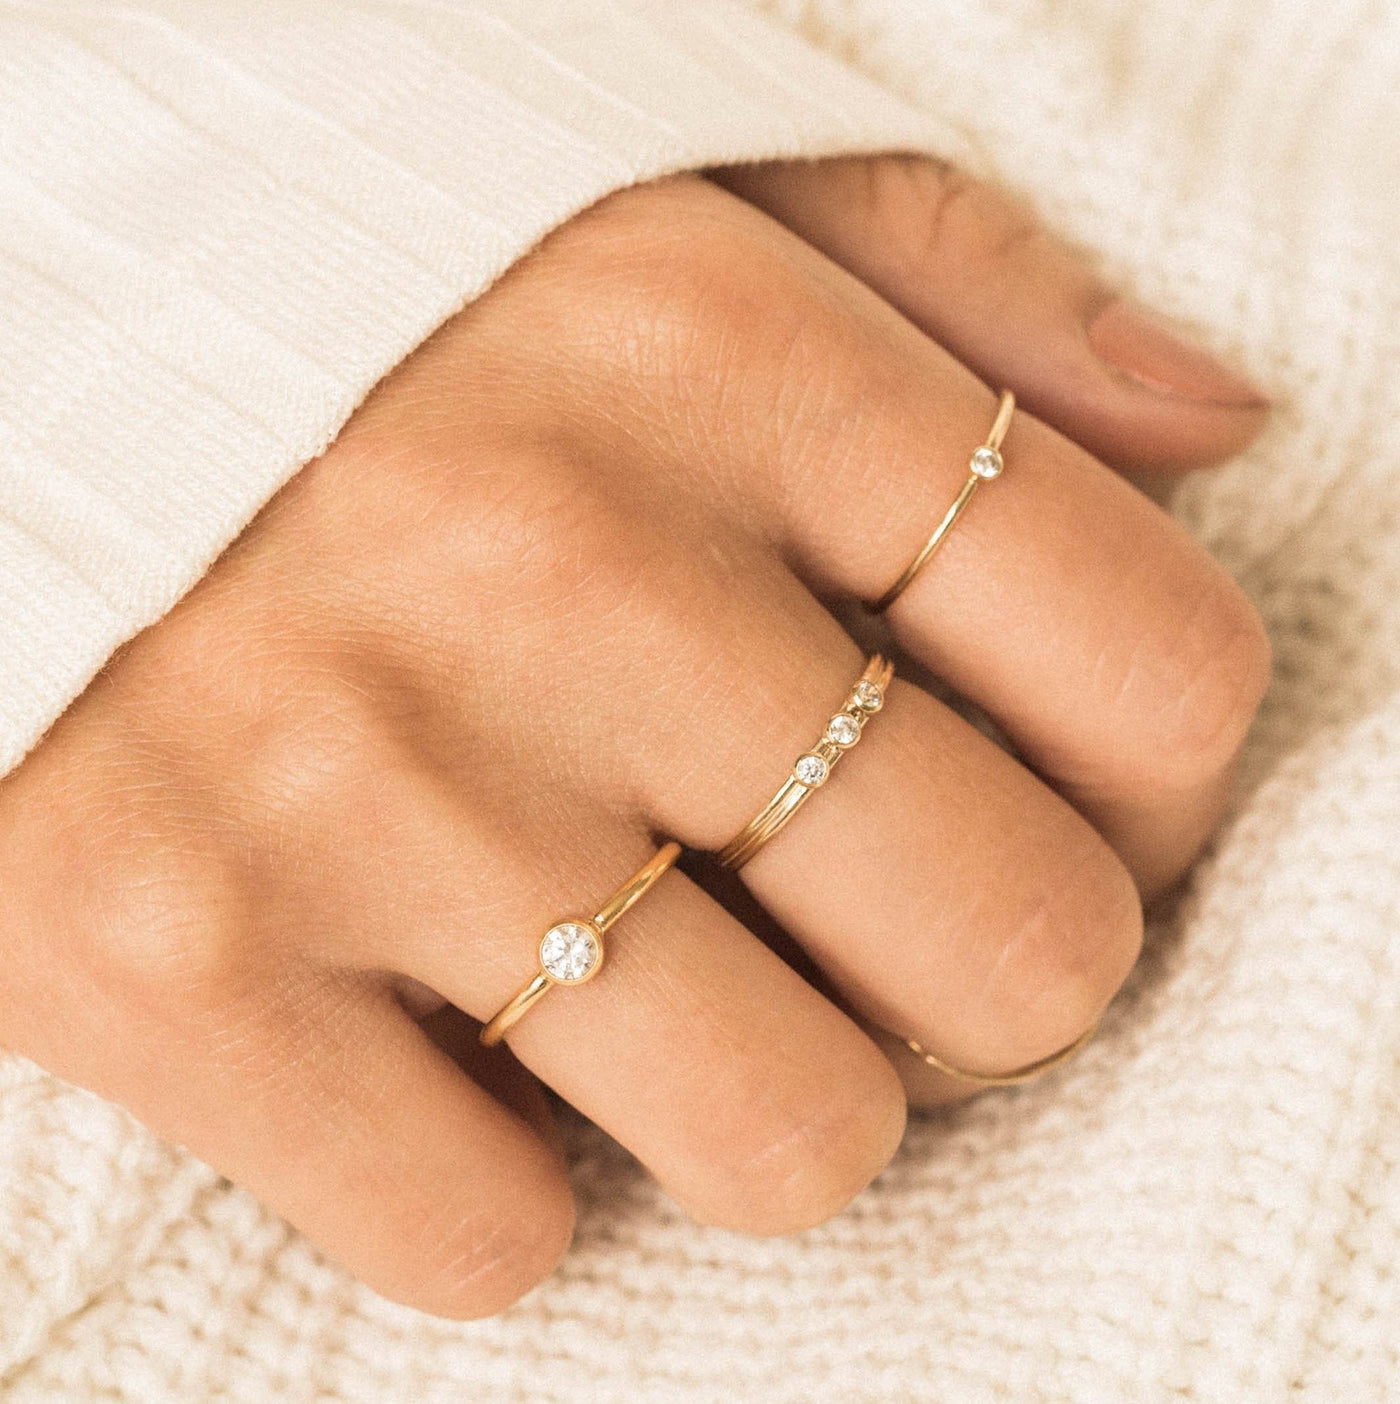 Tiny Solitaire Ring | Simple & Dainty